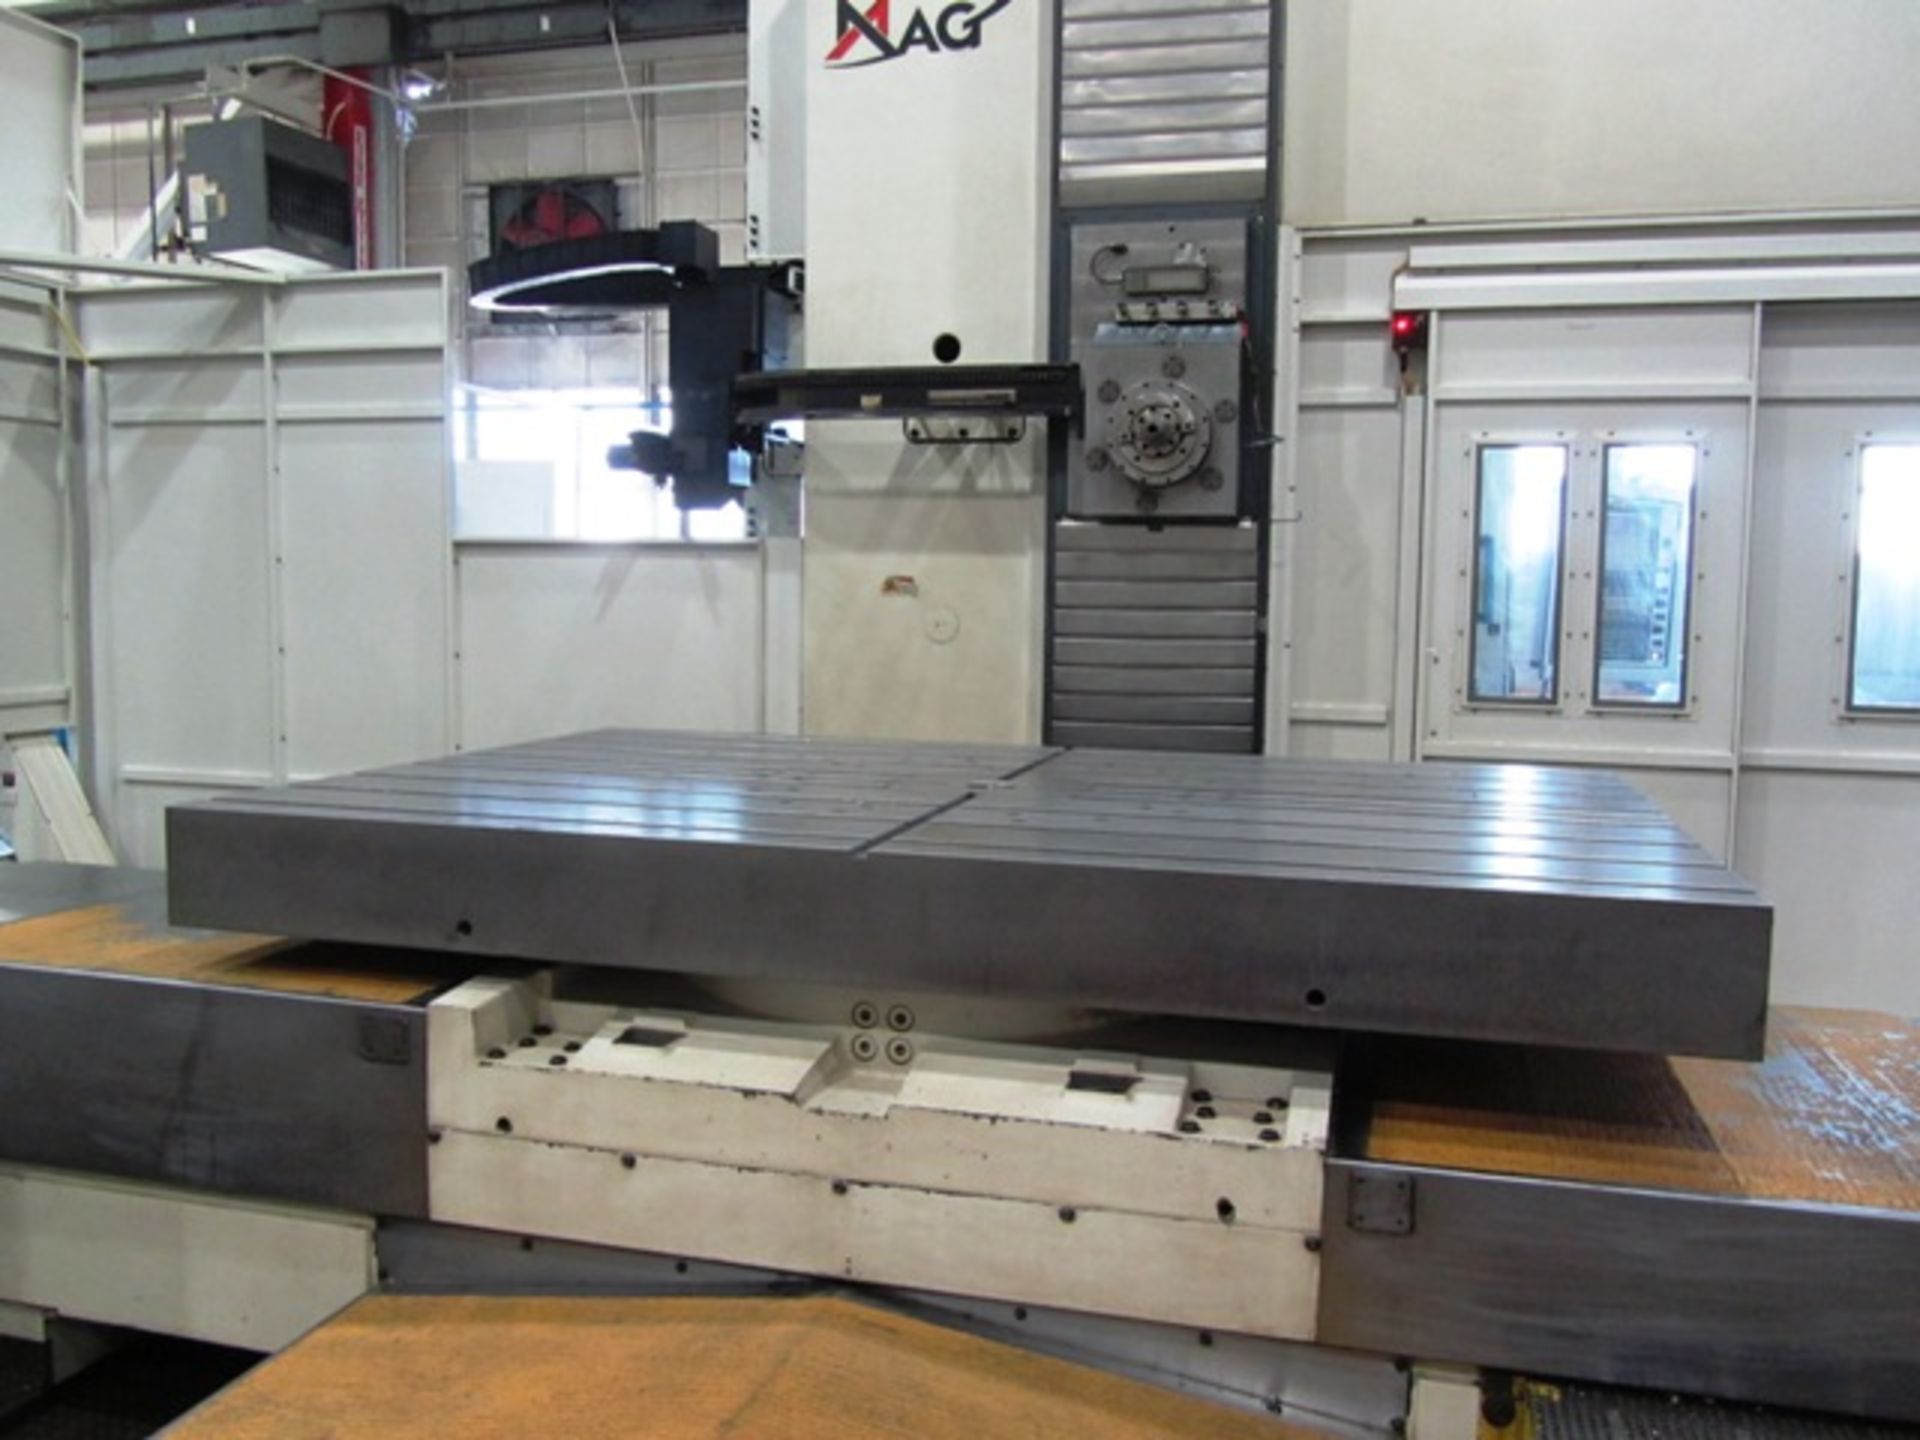 Giddings & Lewis Model RT 1600 6.1'' CNC Table Type Horizontal Boring Mill with 63'' x 98.4'' B-Axis - Image 4 of 4